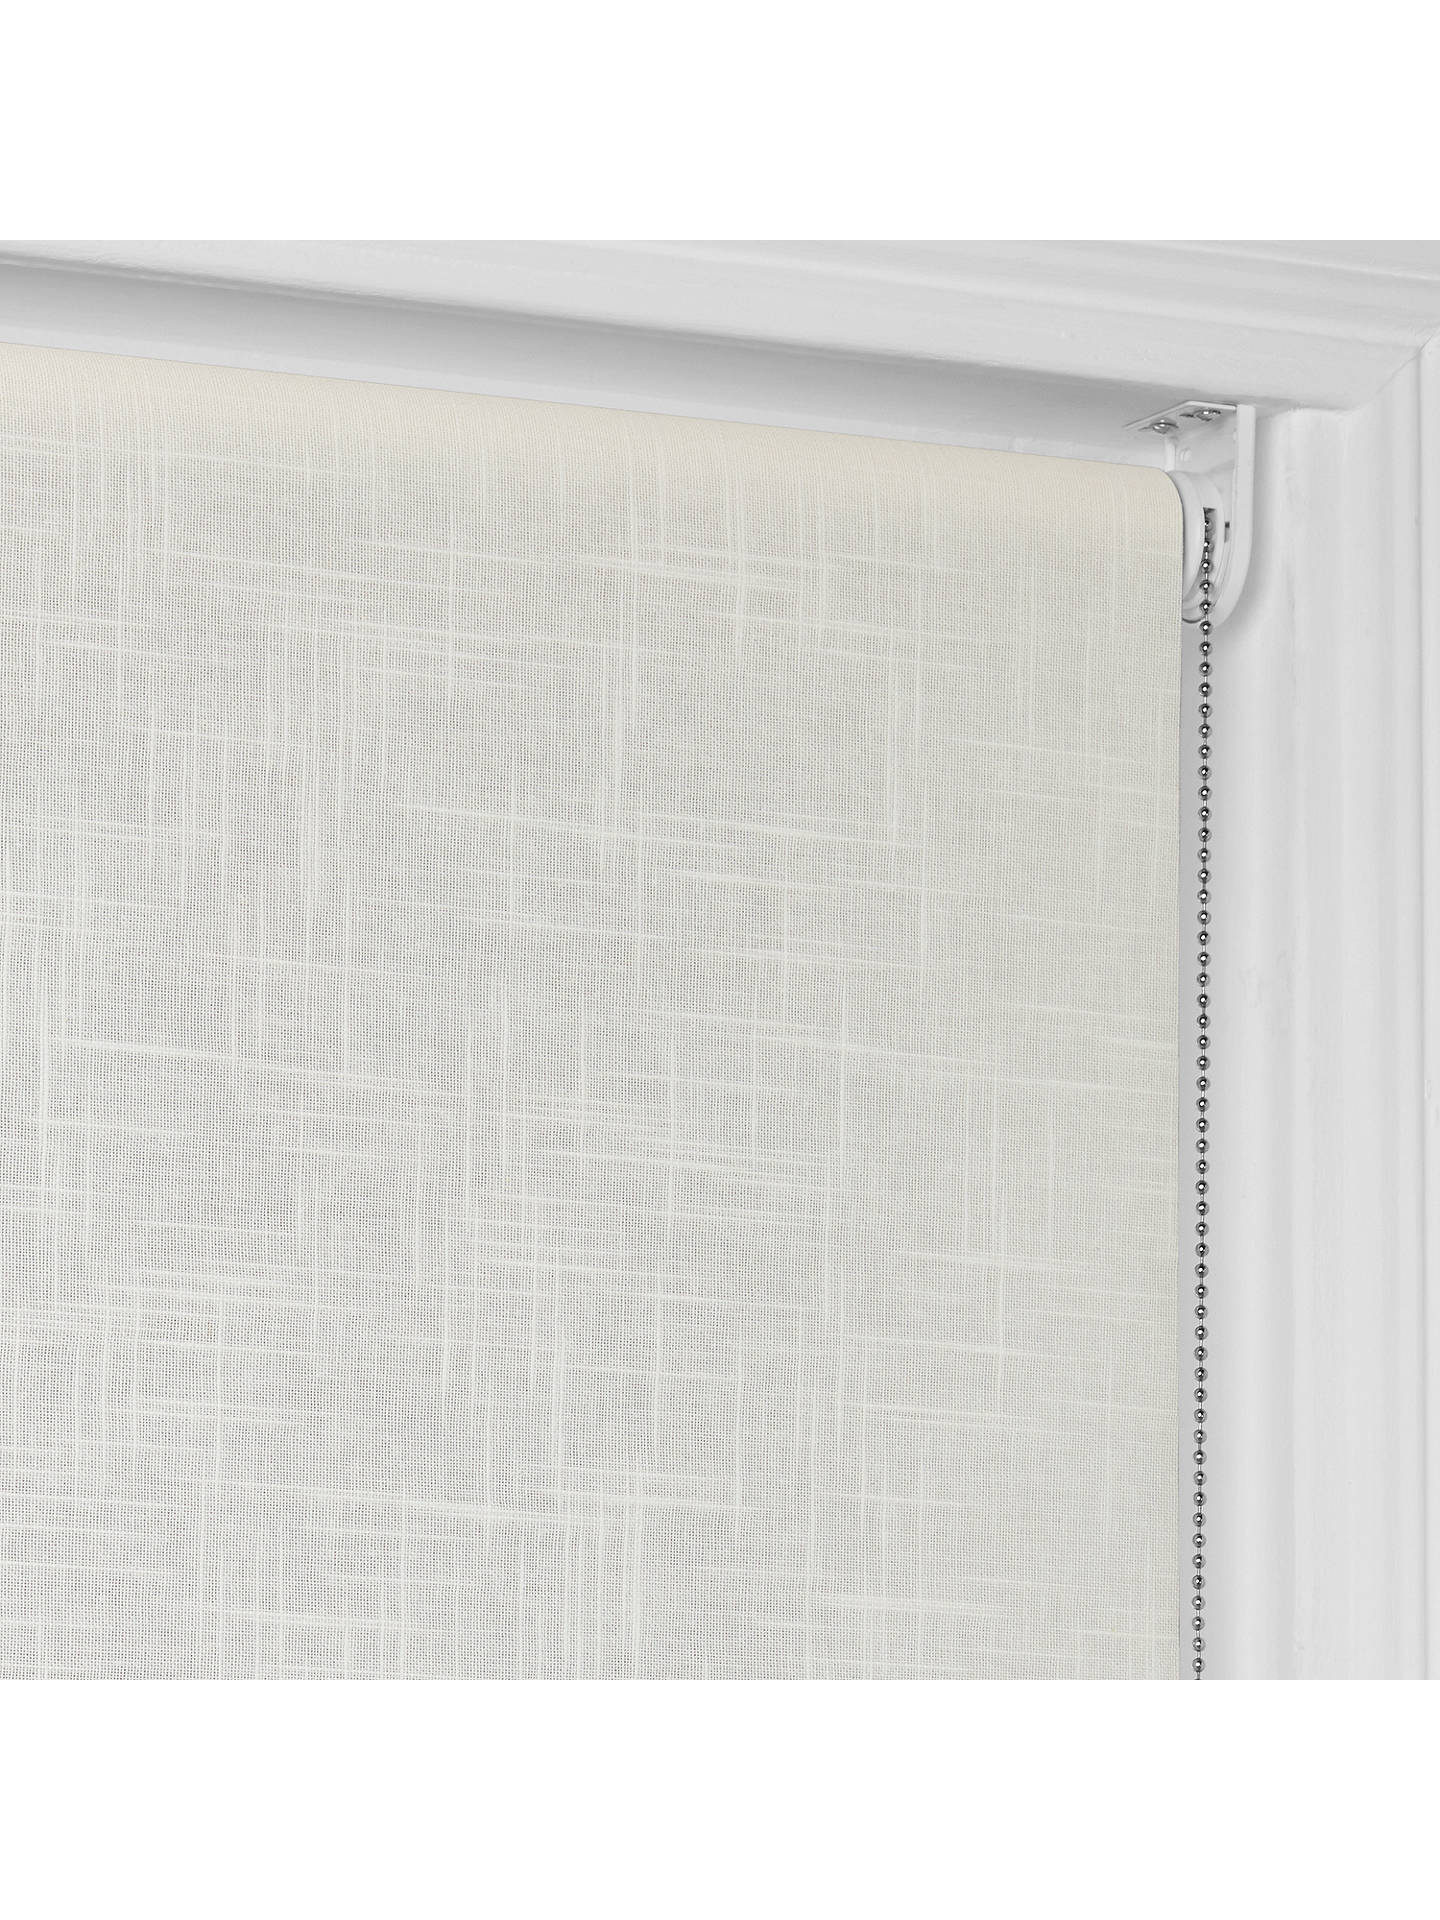 John Lewis Etching Made to Measure Daylight Roller Blind, Ivory